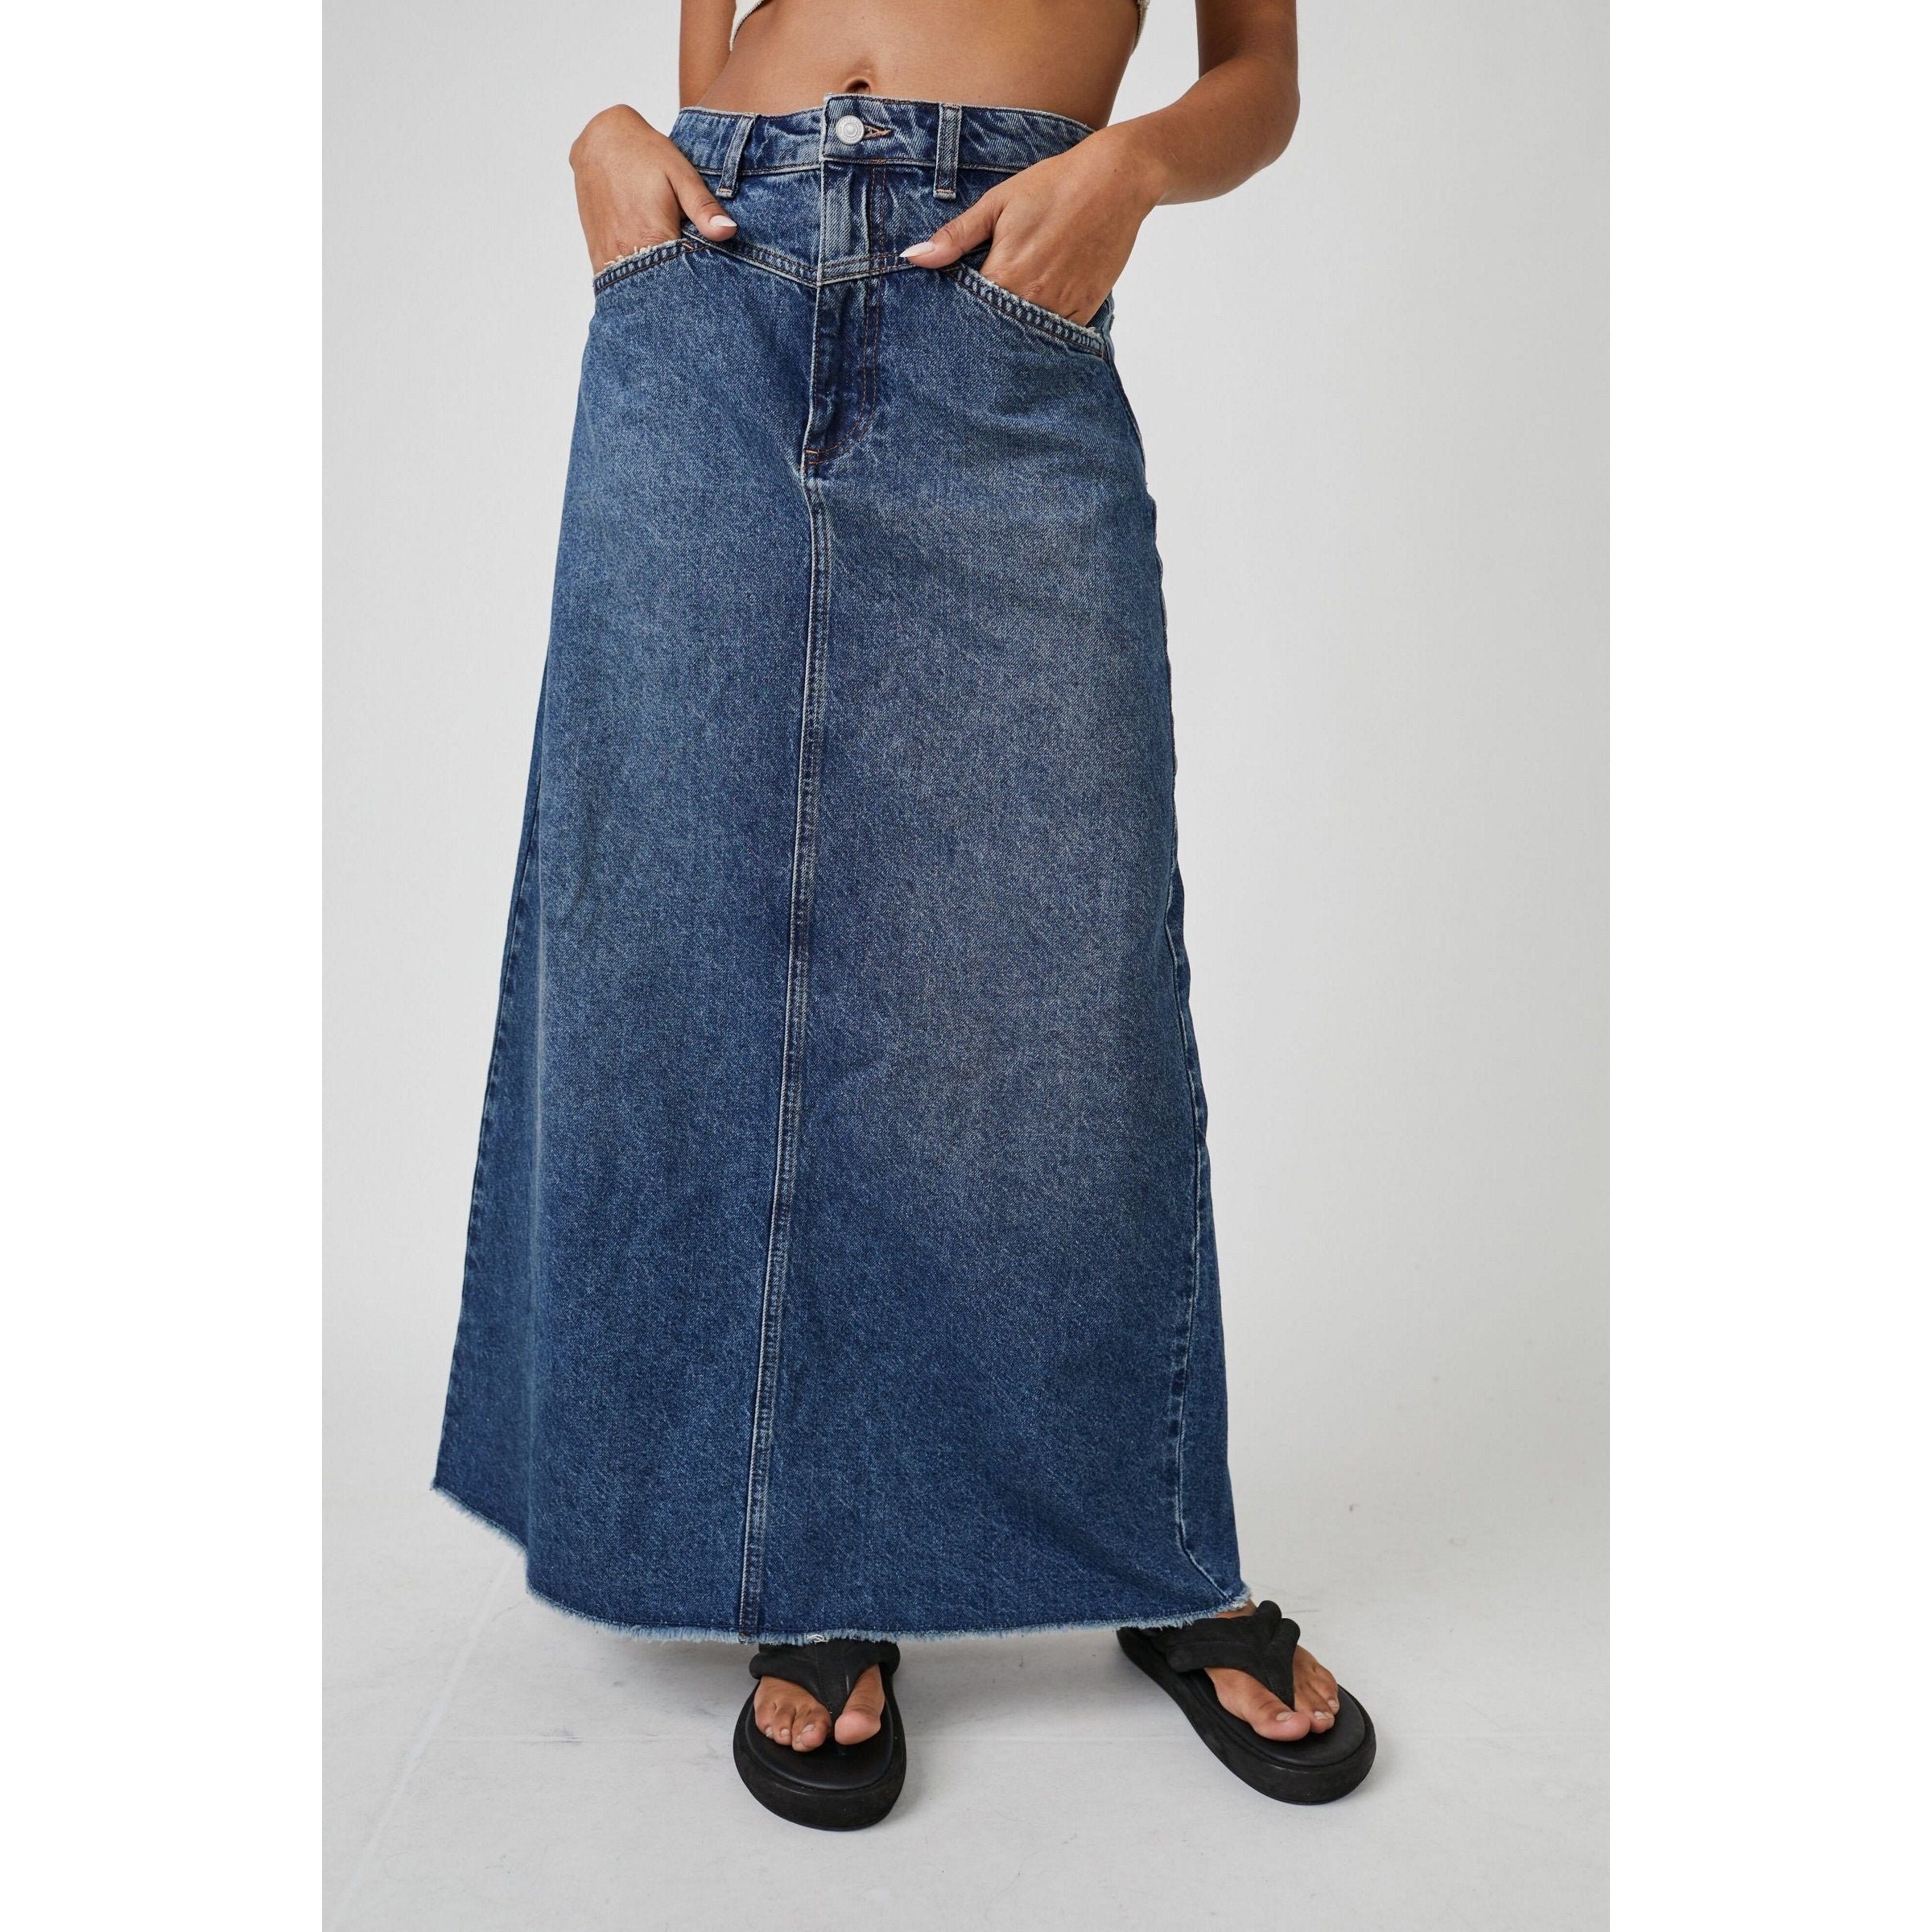 Free People - Come As You Are Denim Maxi Skirt in Dark Indigo-SQ1164818